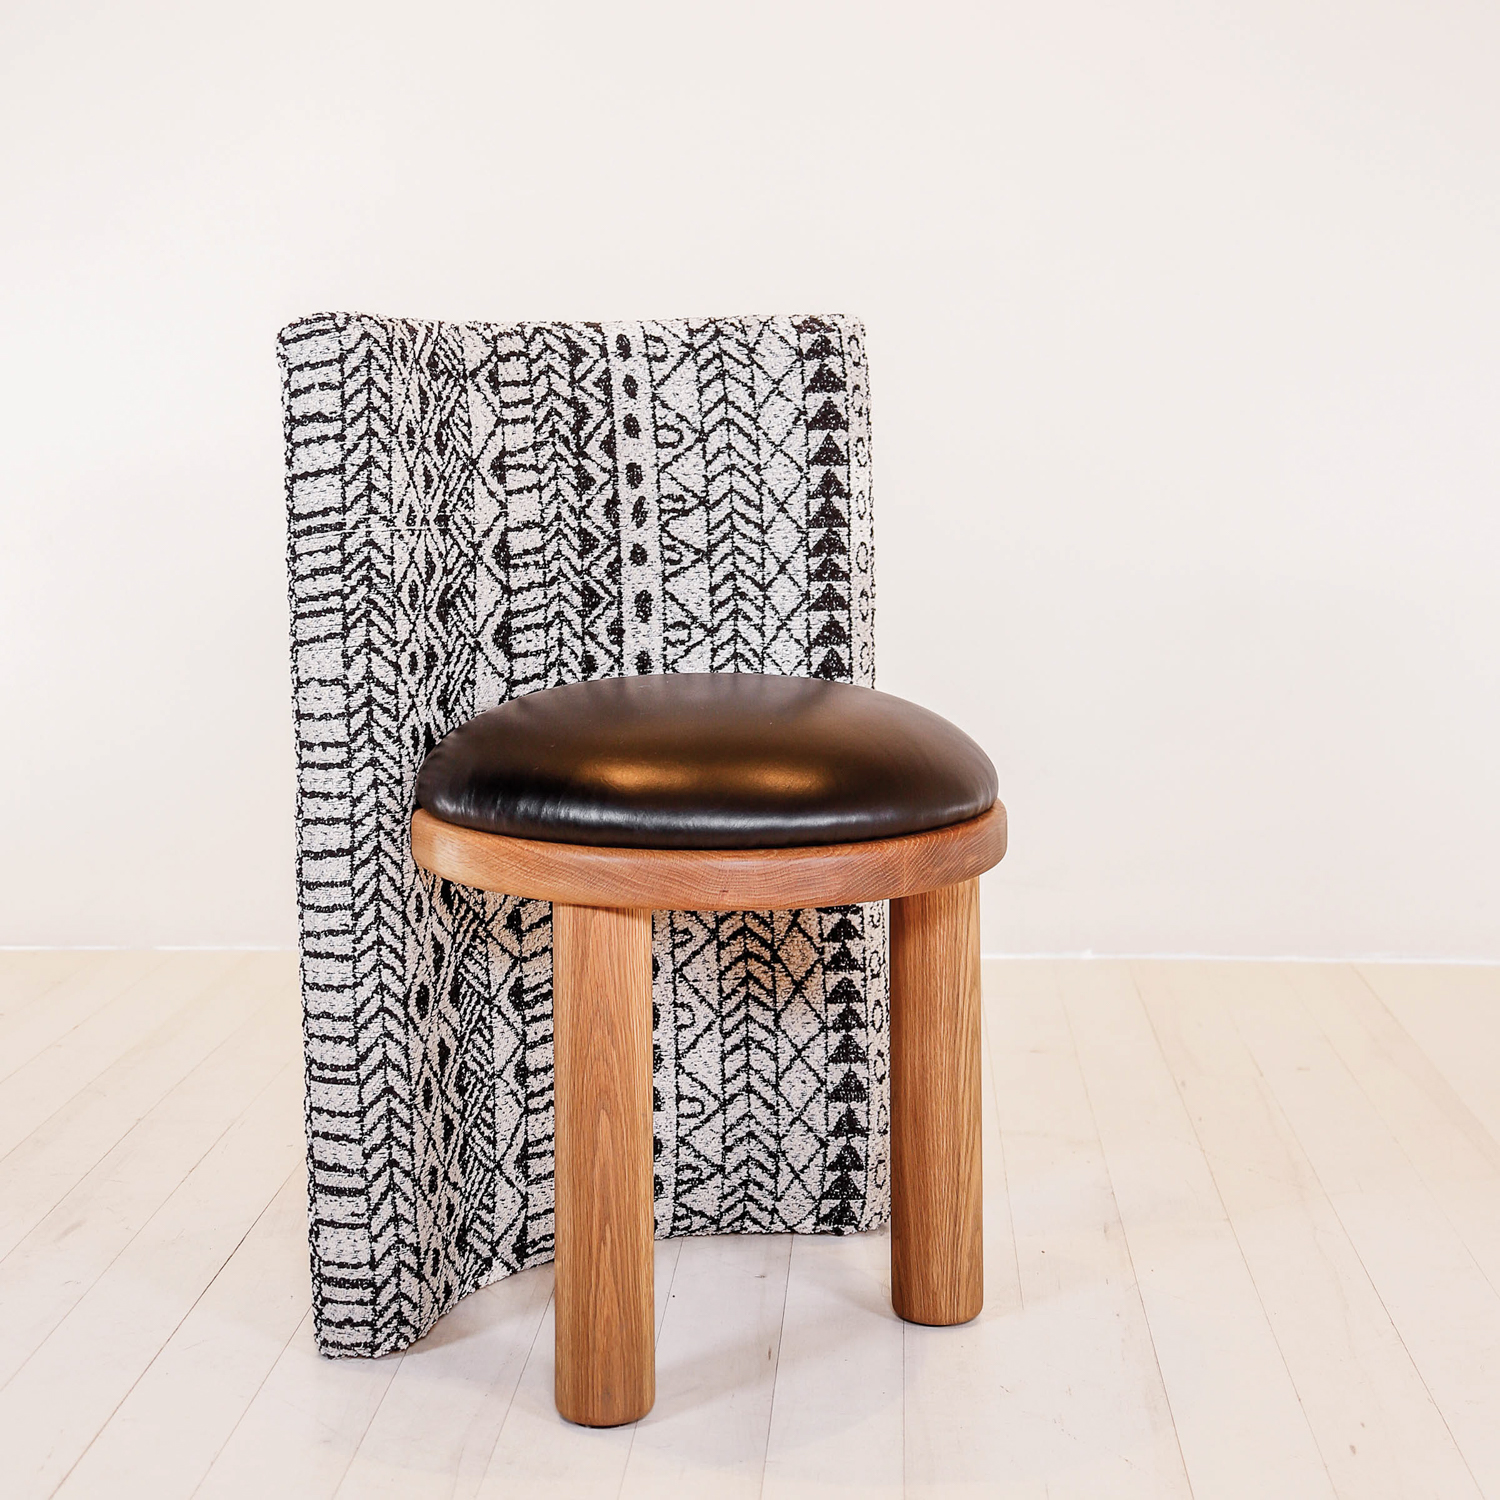 The SG Chair by Thomas Hayes and Samantha Gallagher, with a patterned-fabric back and a wood frame